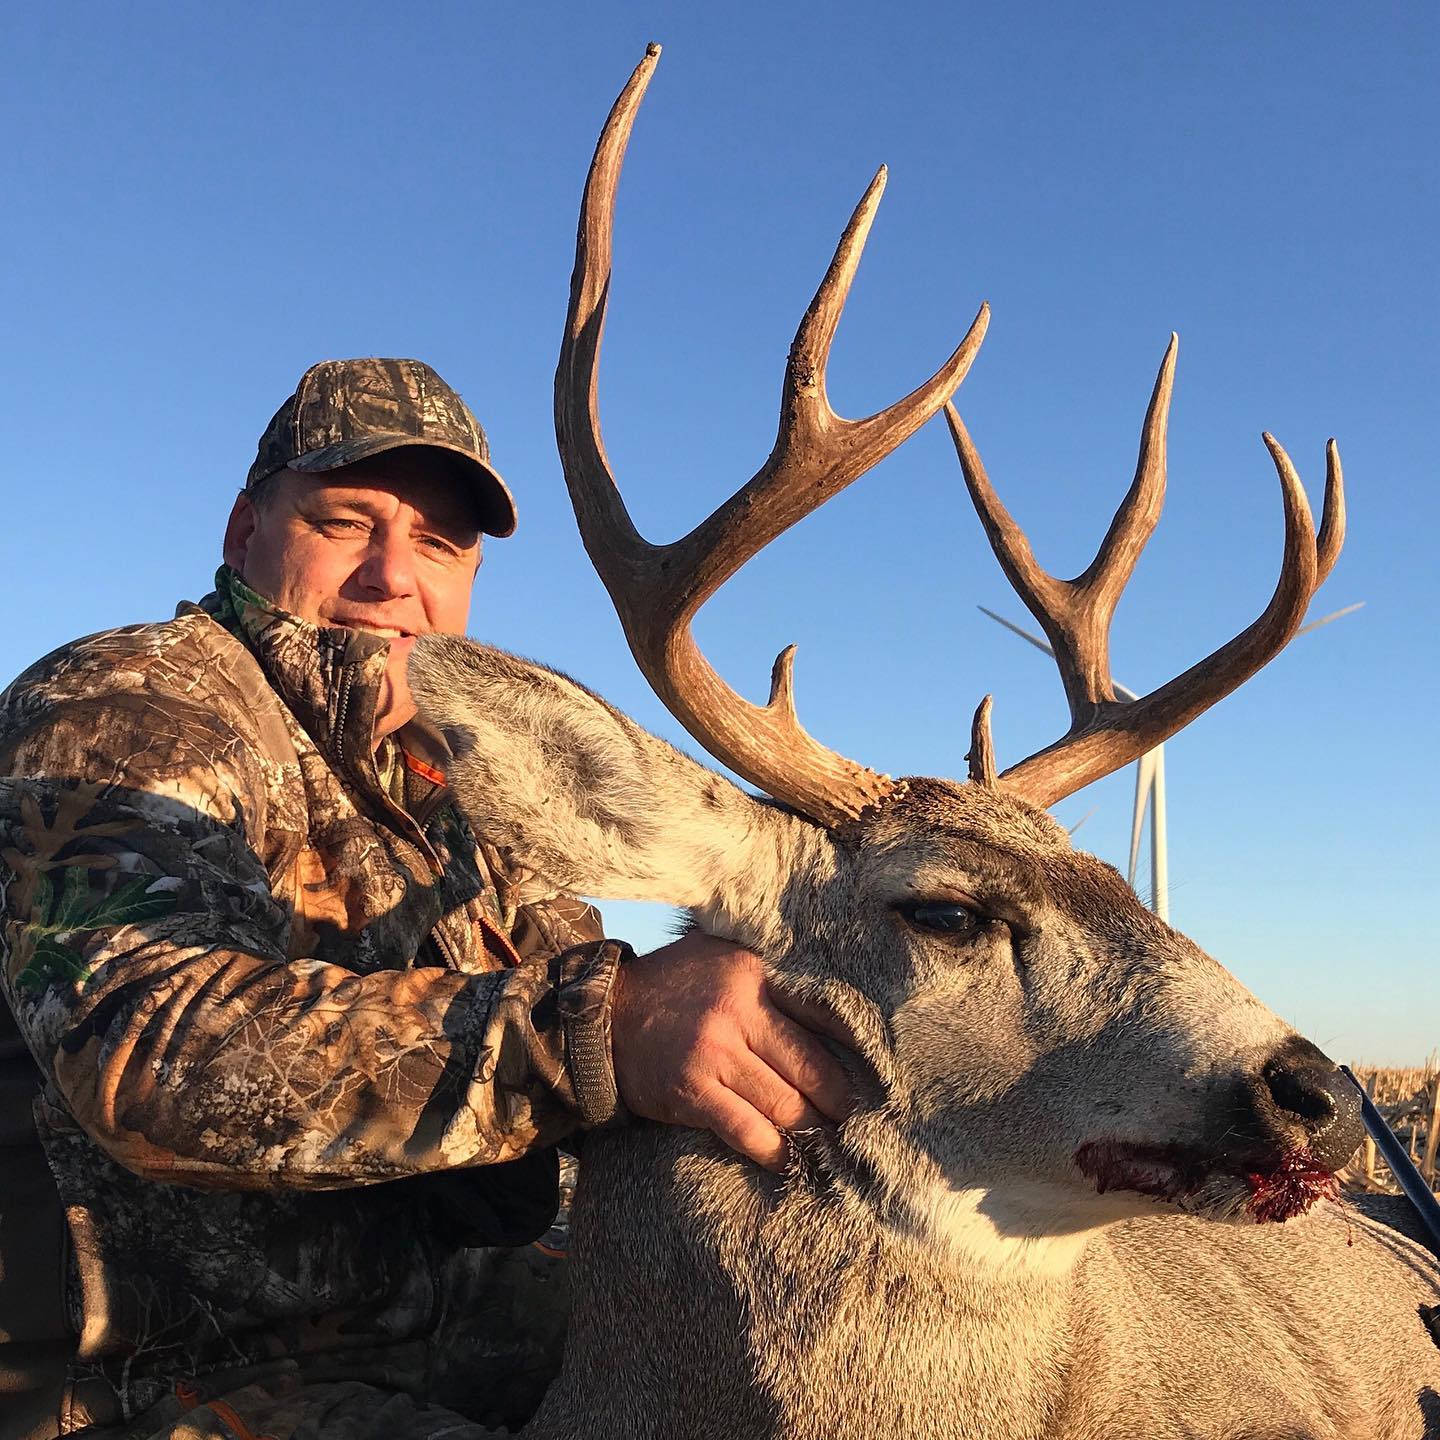 mule deer in the texas panhandle with all american outfitter